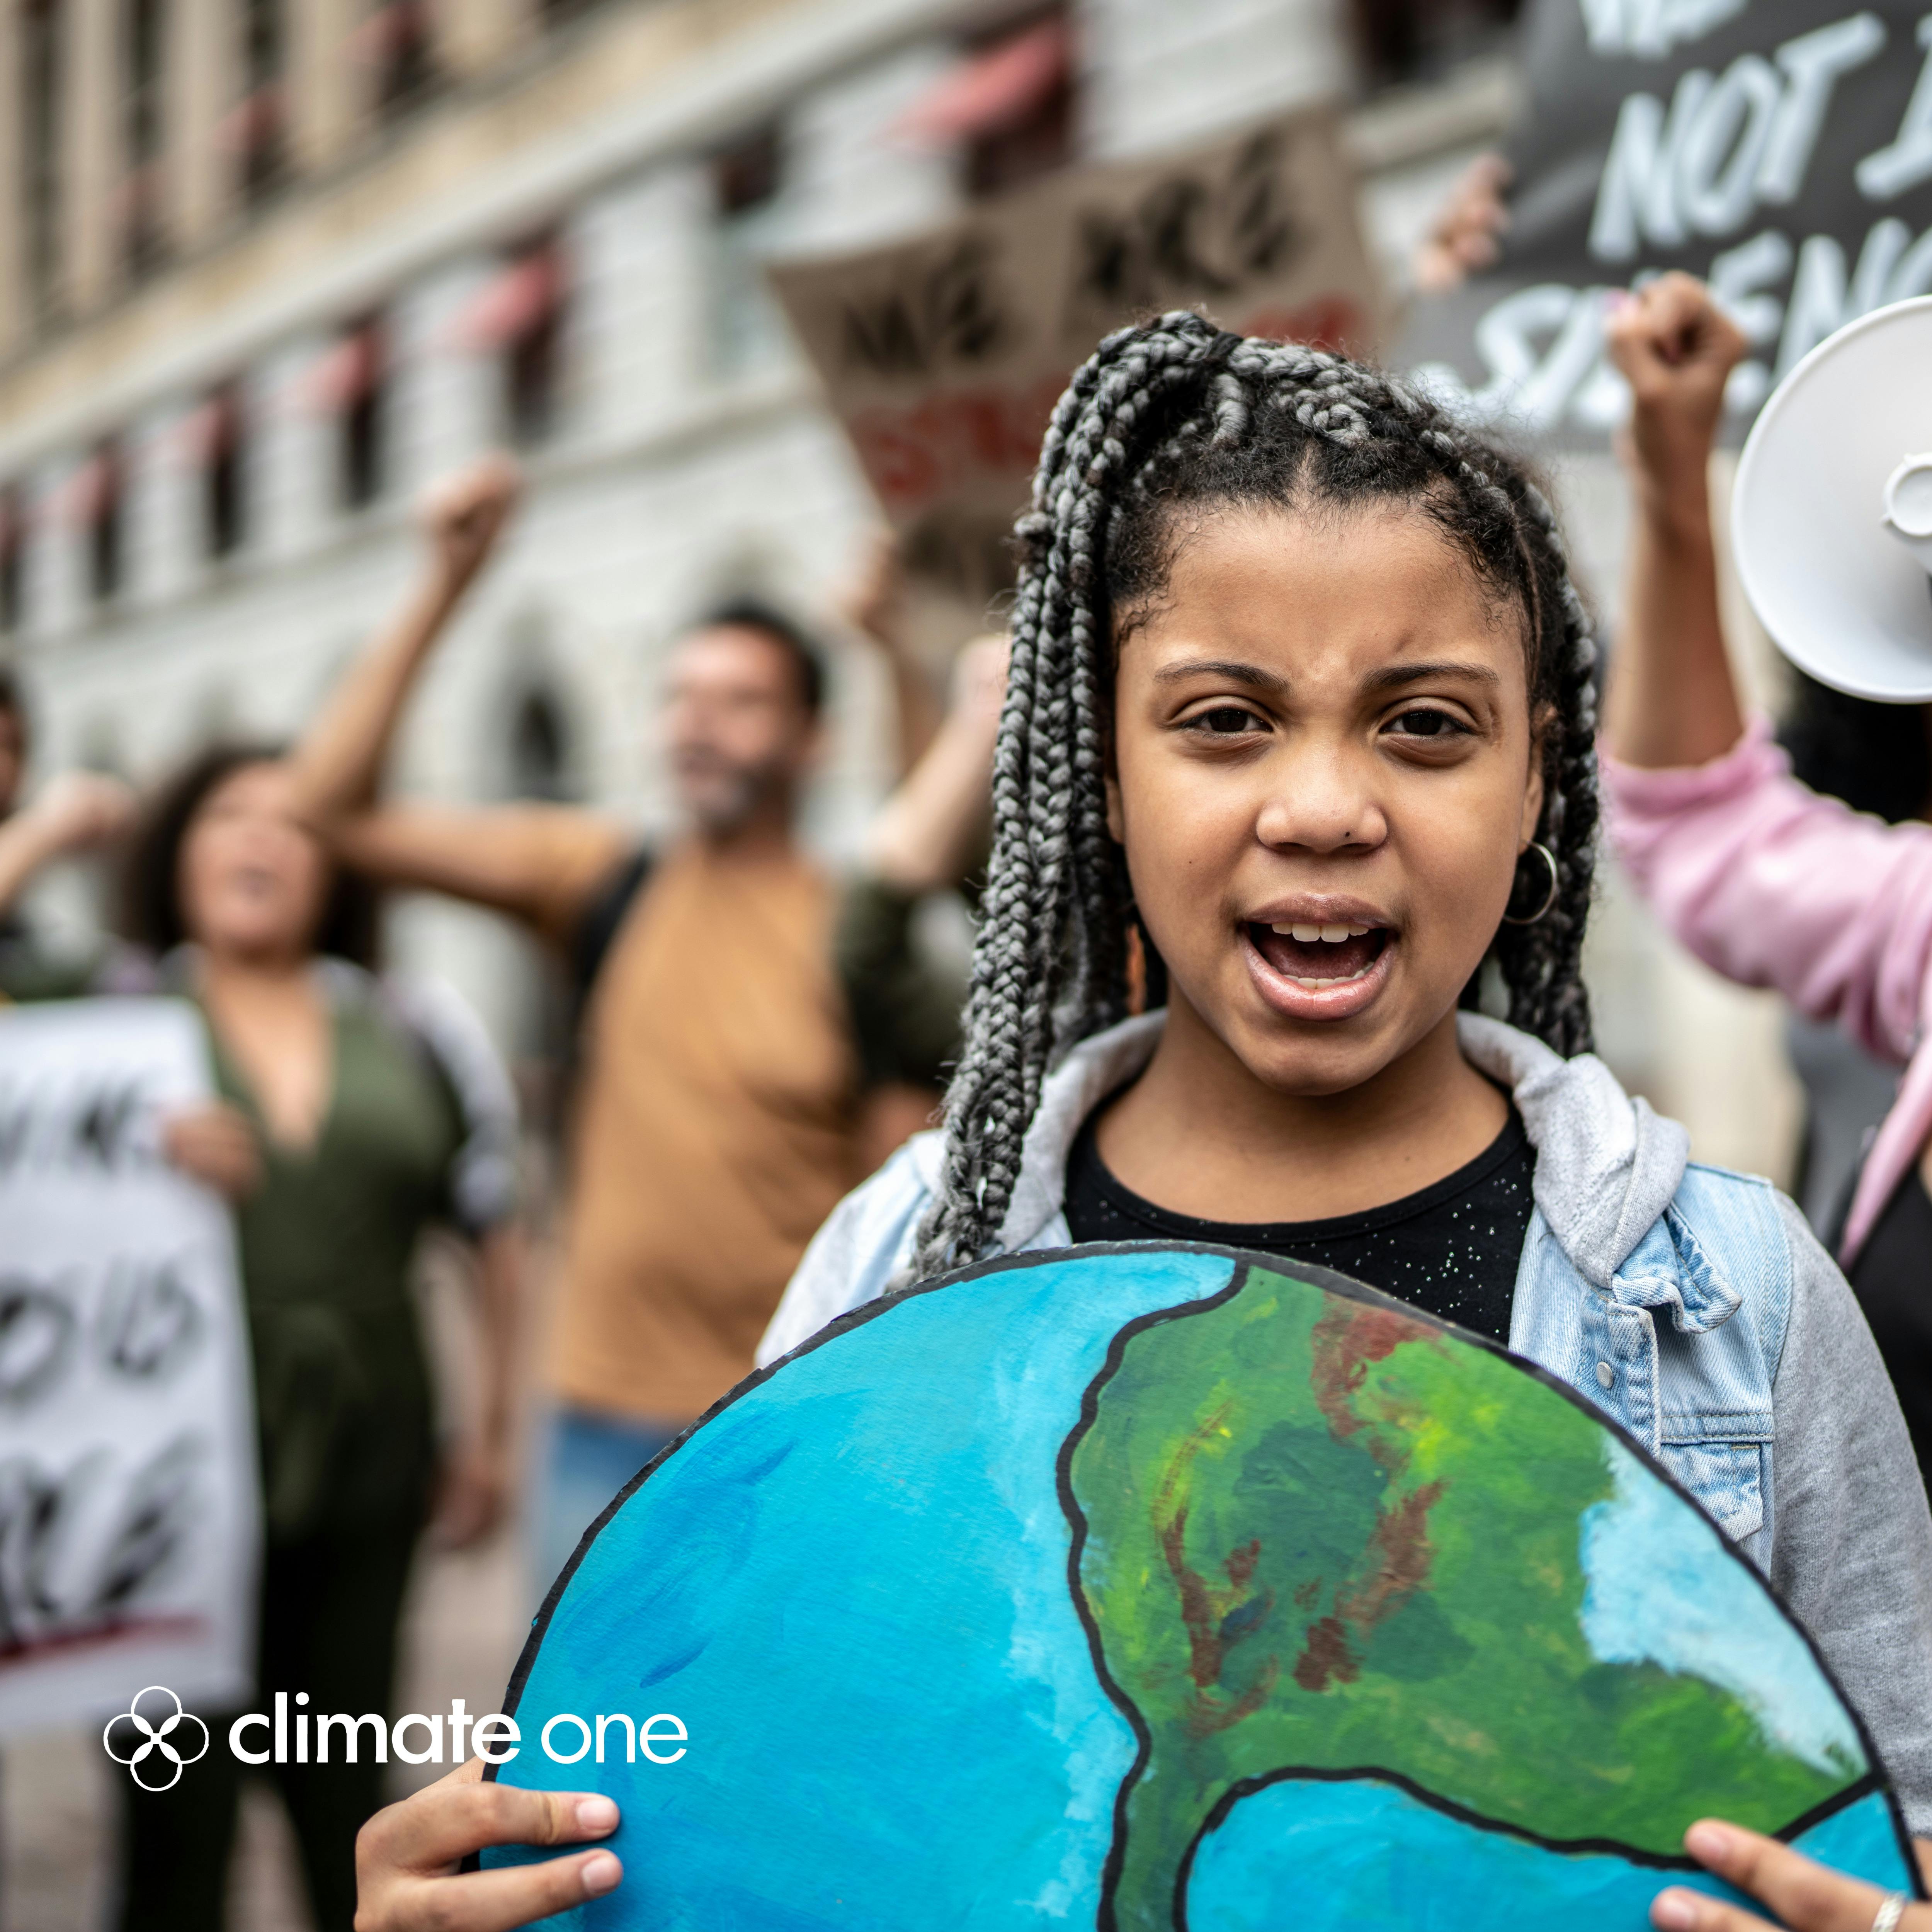 CLIMATE ONE: REWIND: Youth Activists 15 Years Later